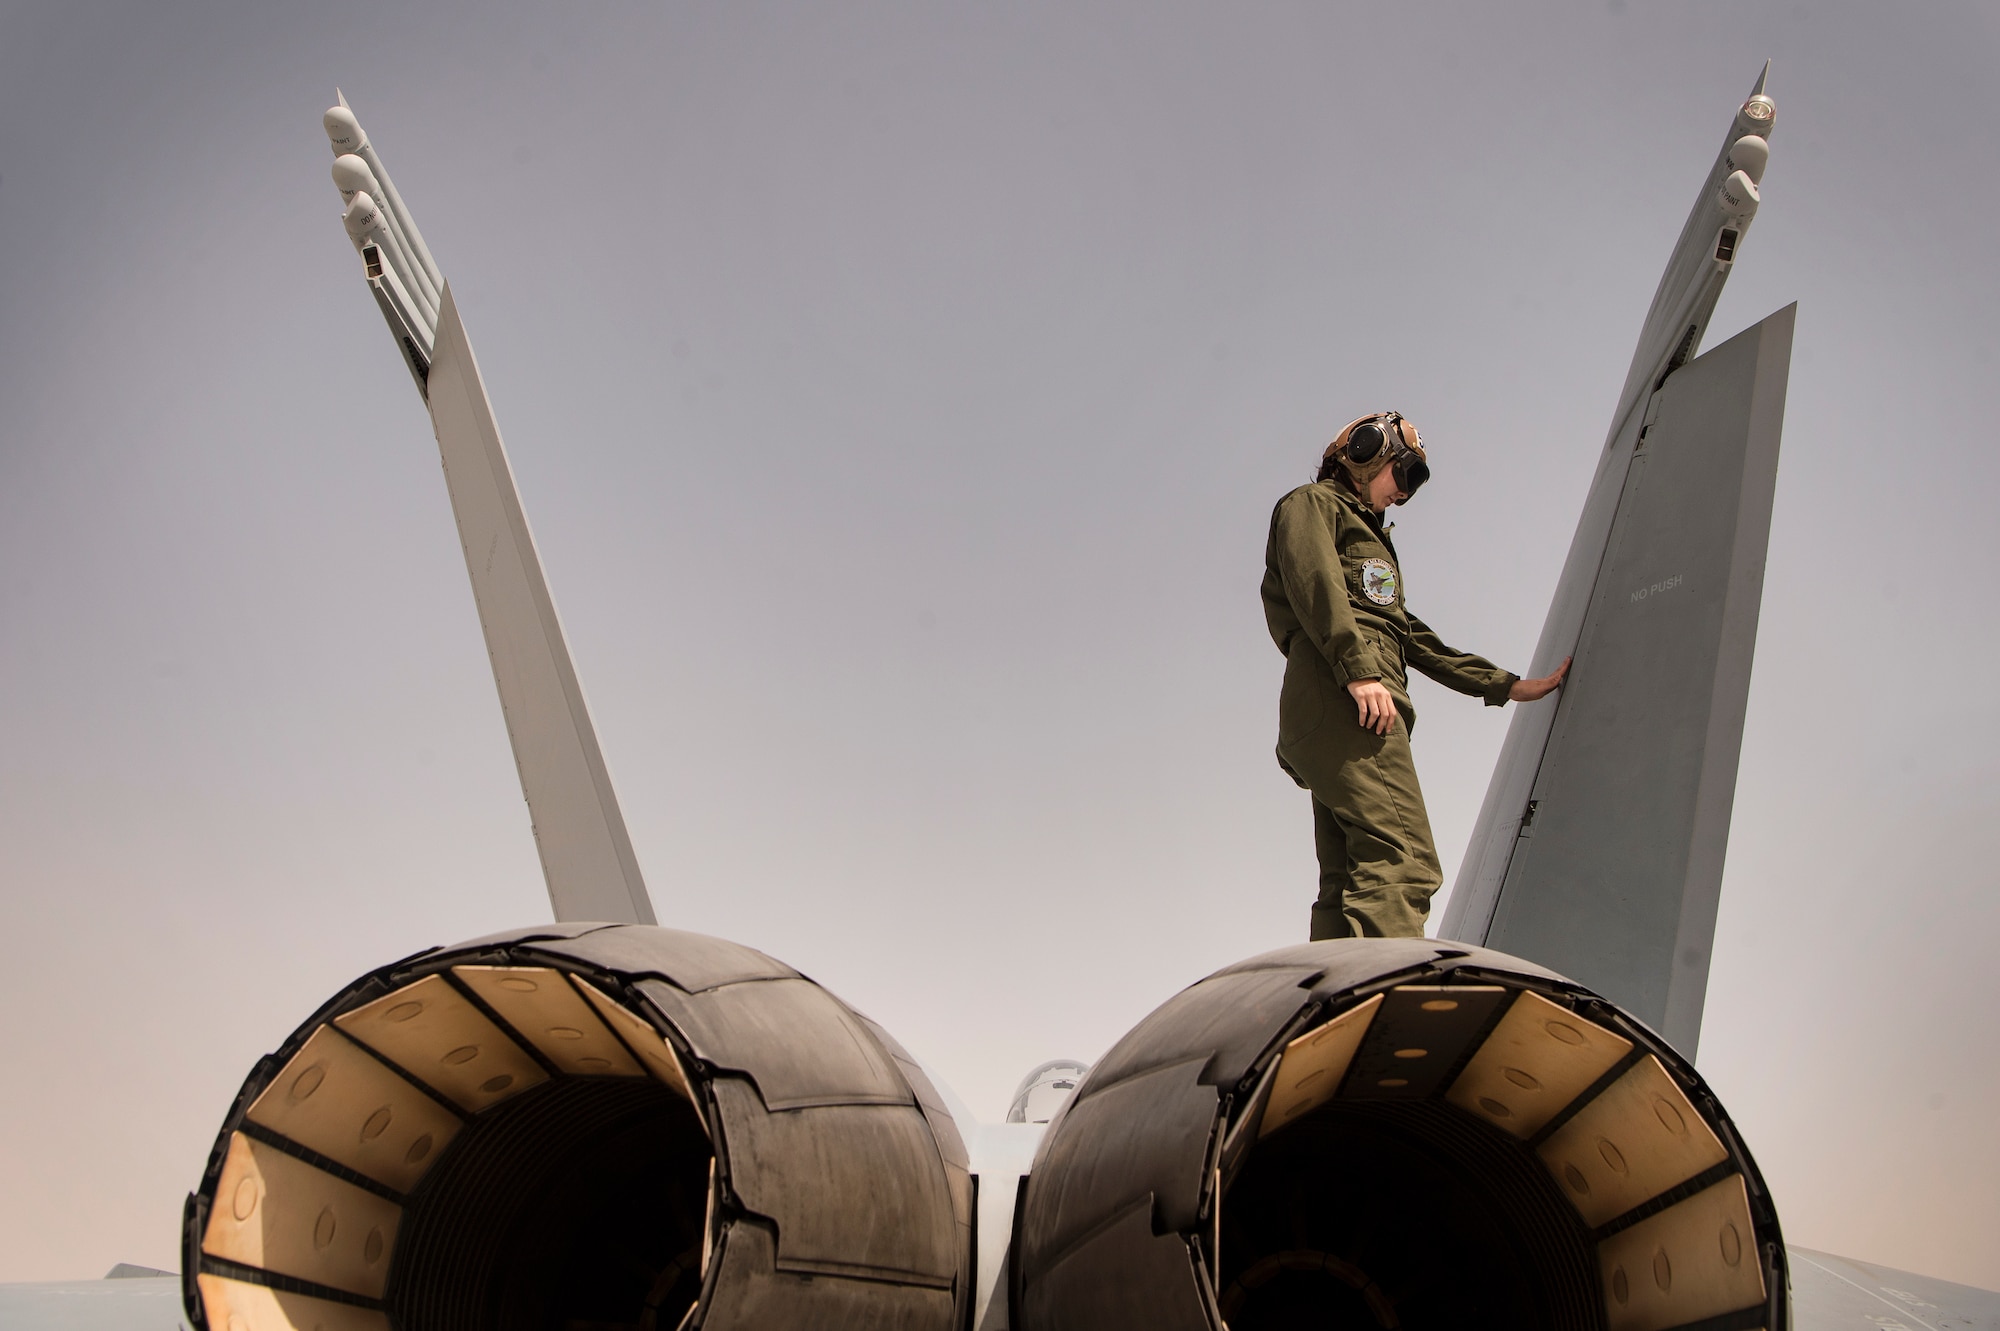 U.S. Navy Airman Madison Arthur, Electronic Attack Squadron 135 (VAQ-135) “Black Ravens” aviation structural mechanic, examines an EA-18G Growler as part of a pre-launch inspection March 7, 2019, at Al Udeid Air Base, Qatar. VAQ-135 is deployed to the U.S. 5th Fleet area of operations in support of naval operations to ensure maritime stability and security in the Central Region, connecting the Mediterranean and the Pacific through the western Indian Ocean and three strategic choke points. Through the use of EA-18G Growler aircraft, VAQ-135 brings electronic based airborne attack and defense capabilities to Al Udeid’s joint environment by detecting, identifying, locating, and suppressing hostile “emitters.” (U.S. Air Force photo by Tech. Sgt. Christopher Hubenthal)